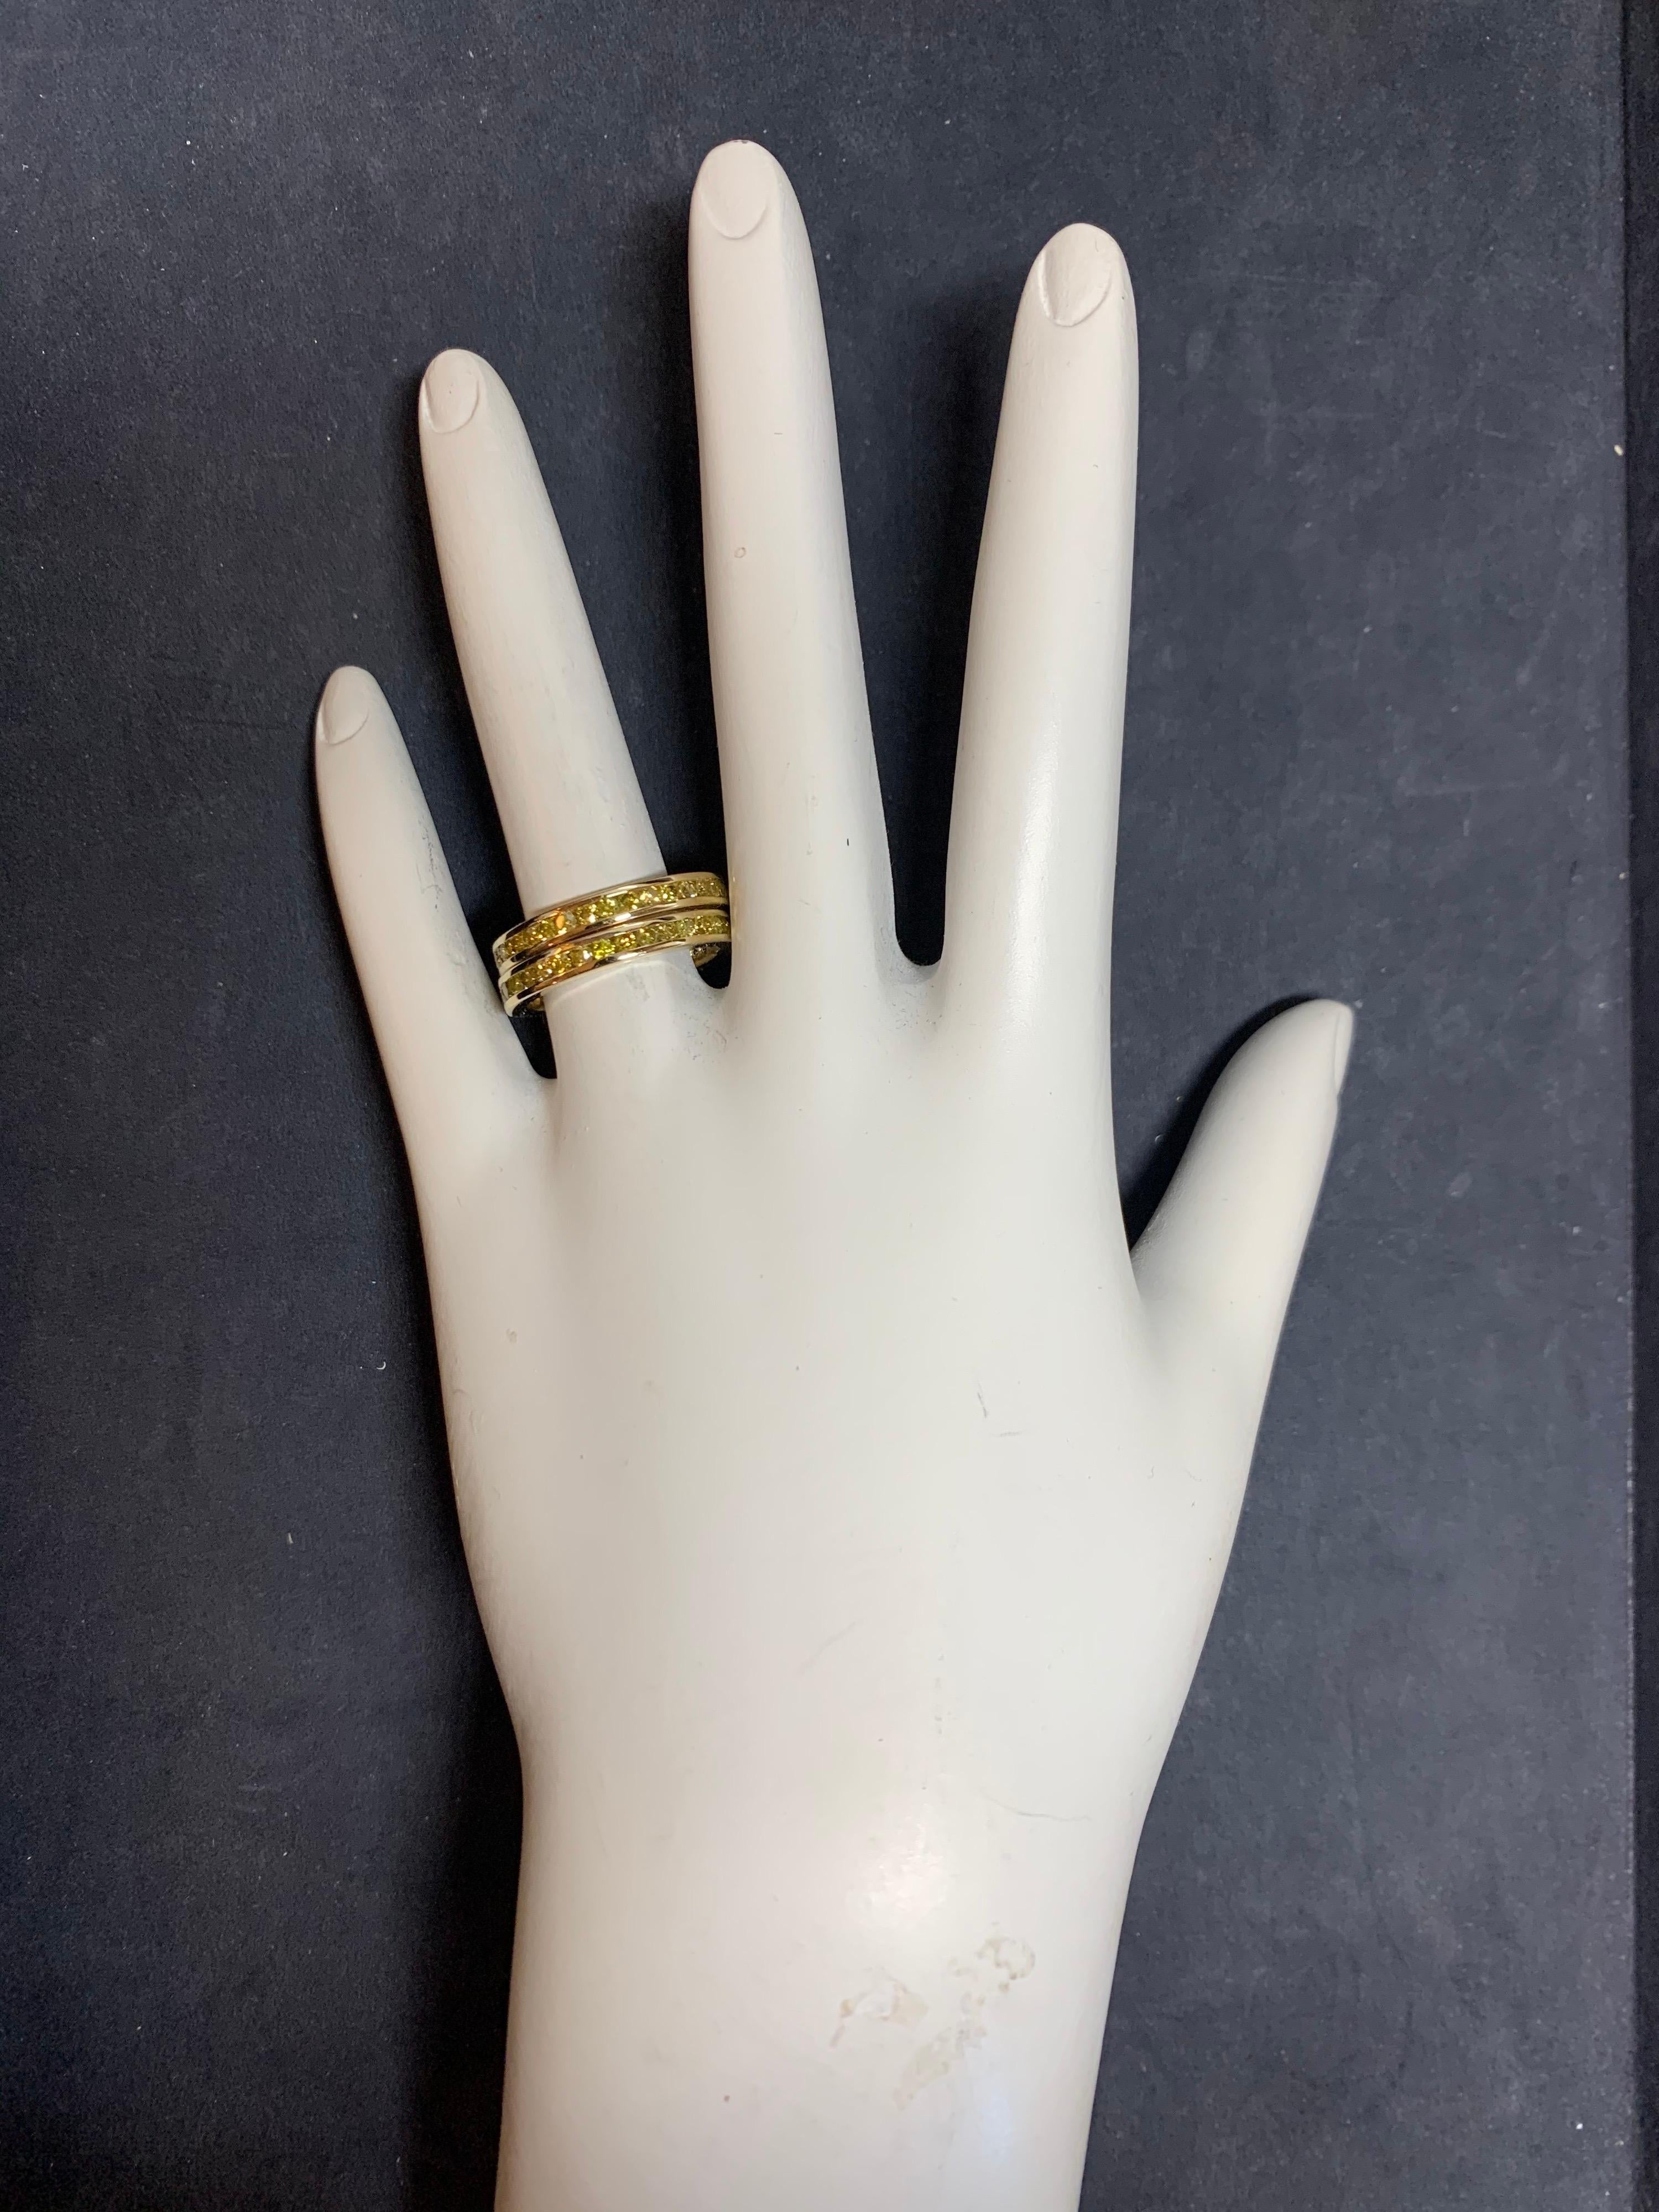 Modern Yellow Gold Matching Band Set.

Each band is set with 34 Natural Fancy Intense Yellow Canary Diamonds weighing 1.70 carats each, 3.40 Carats Total. Weights are approximate.

Ring size is 6.75, weight is 2.6 grams each (5.2 grams total). Width